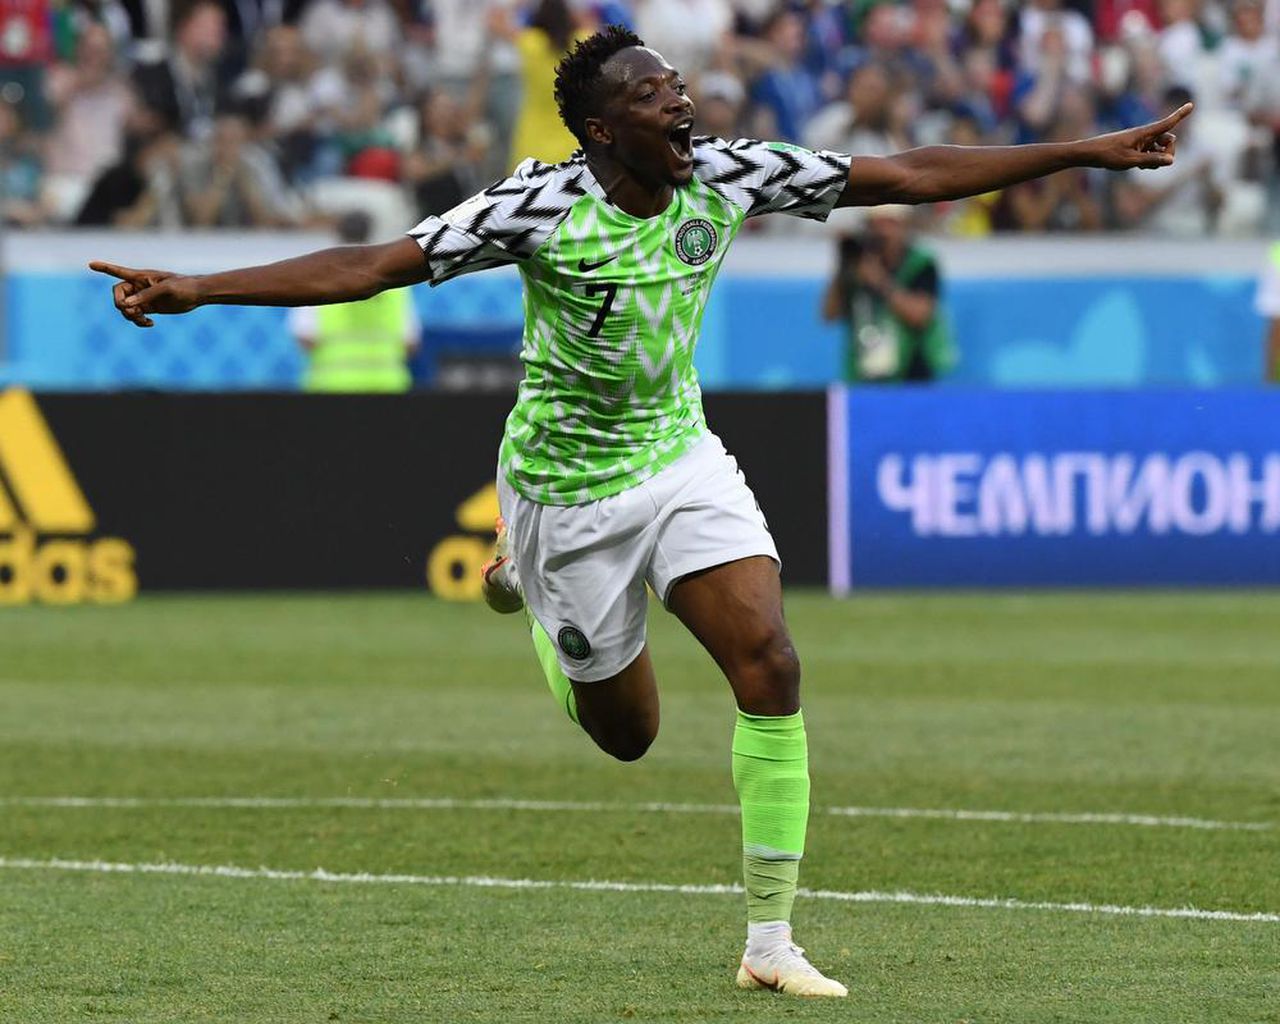 Ahmed Musa scores twice to give Nigeria win over Iceland